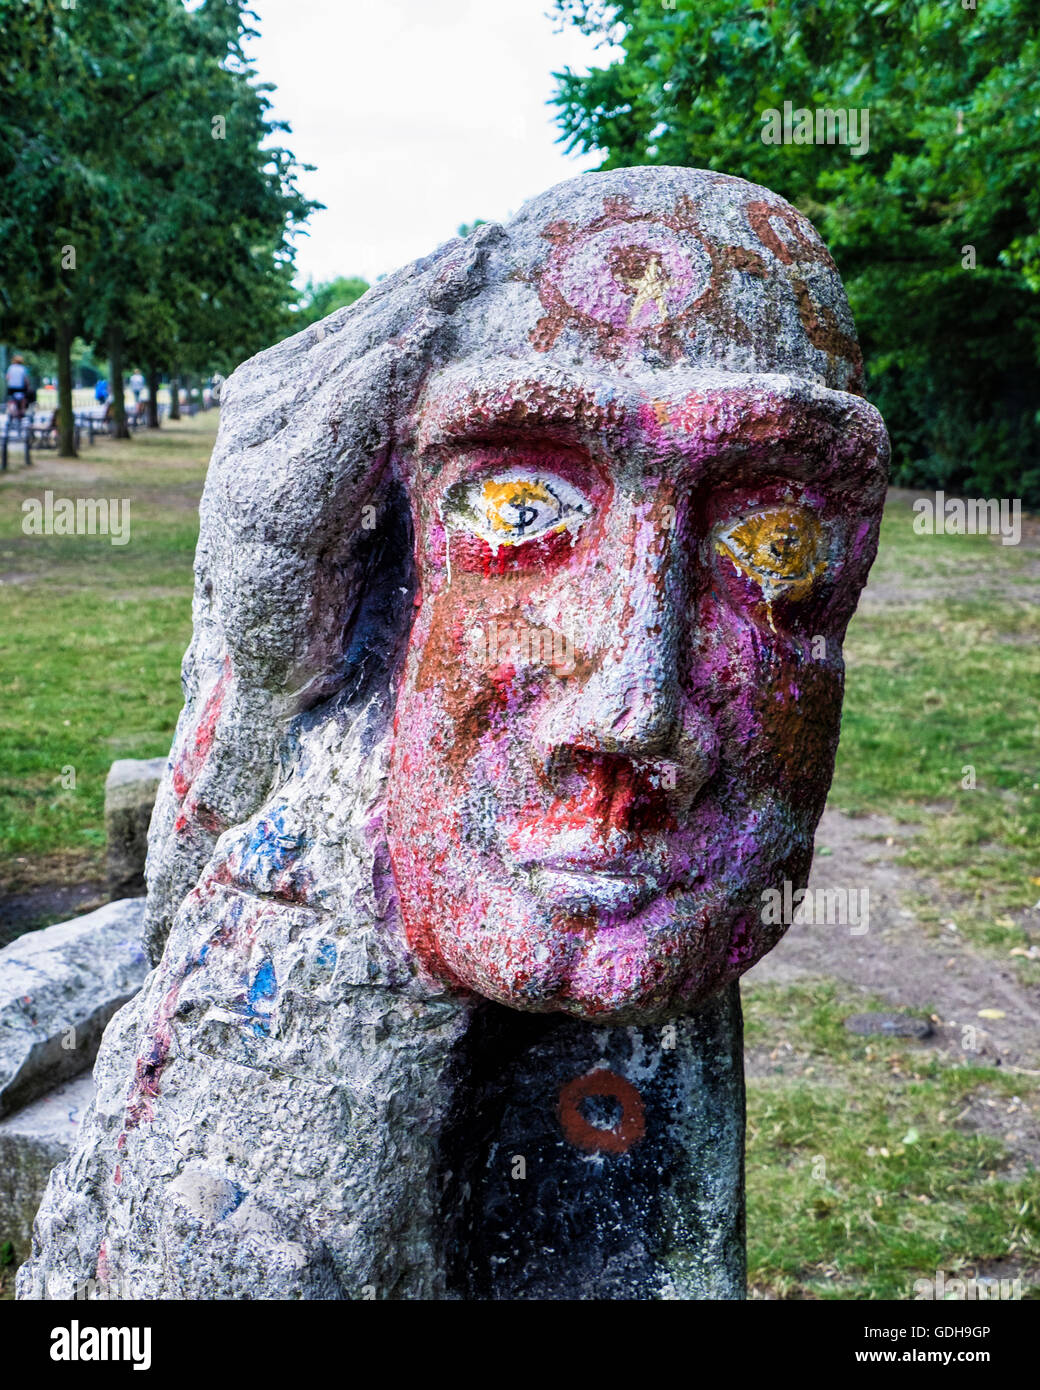 Gorlitzer Park, Kreuzberg. Stone sculpture, man holding head with large hand and dollar signs in eyes Stock Photo